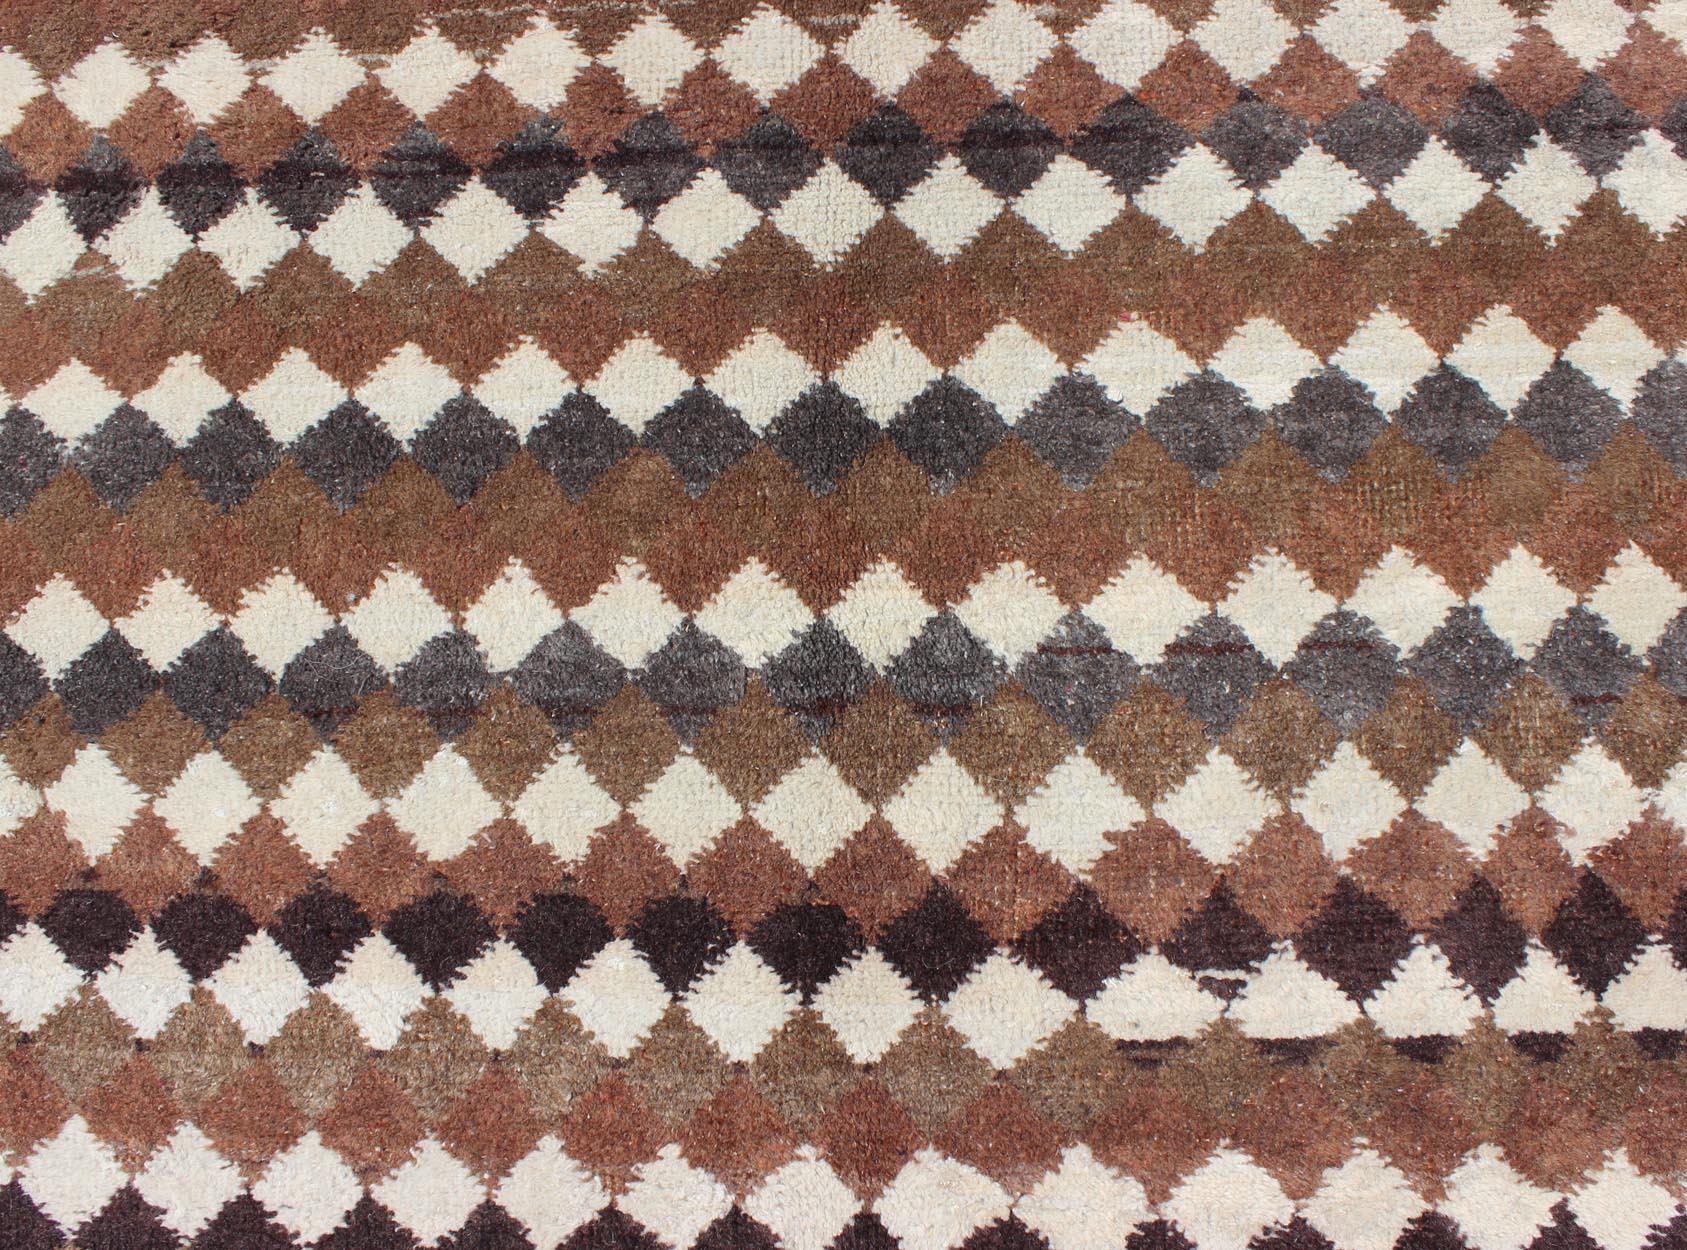 Mid-Century Modern Rug with All-Over Checkerboard Pattern in Multi Brown Tones For Sale 1